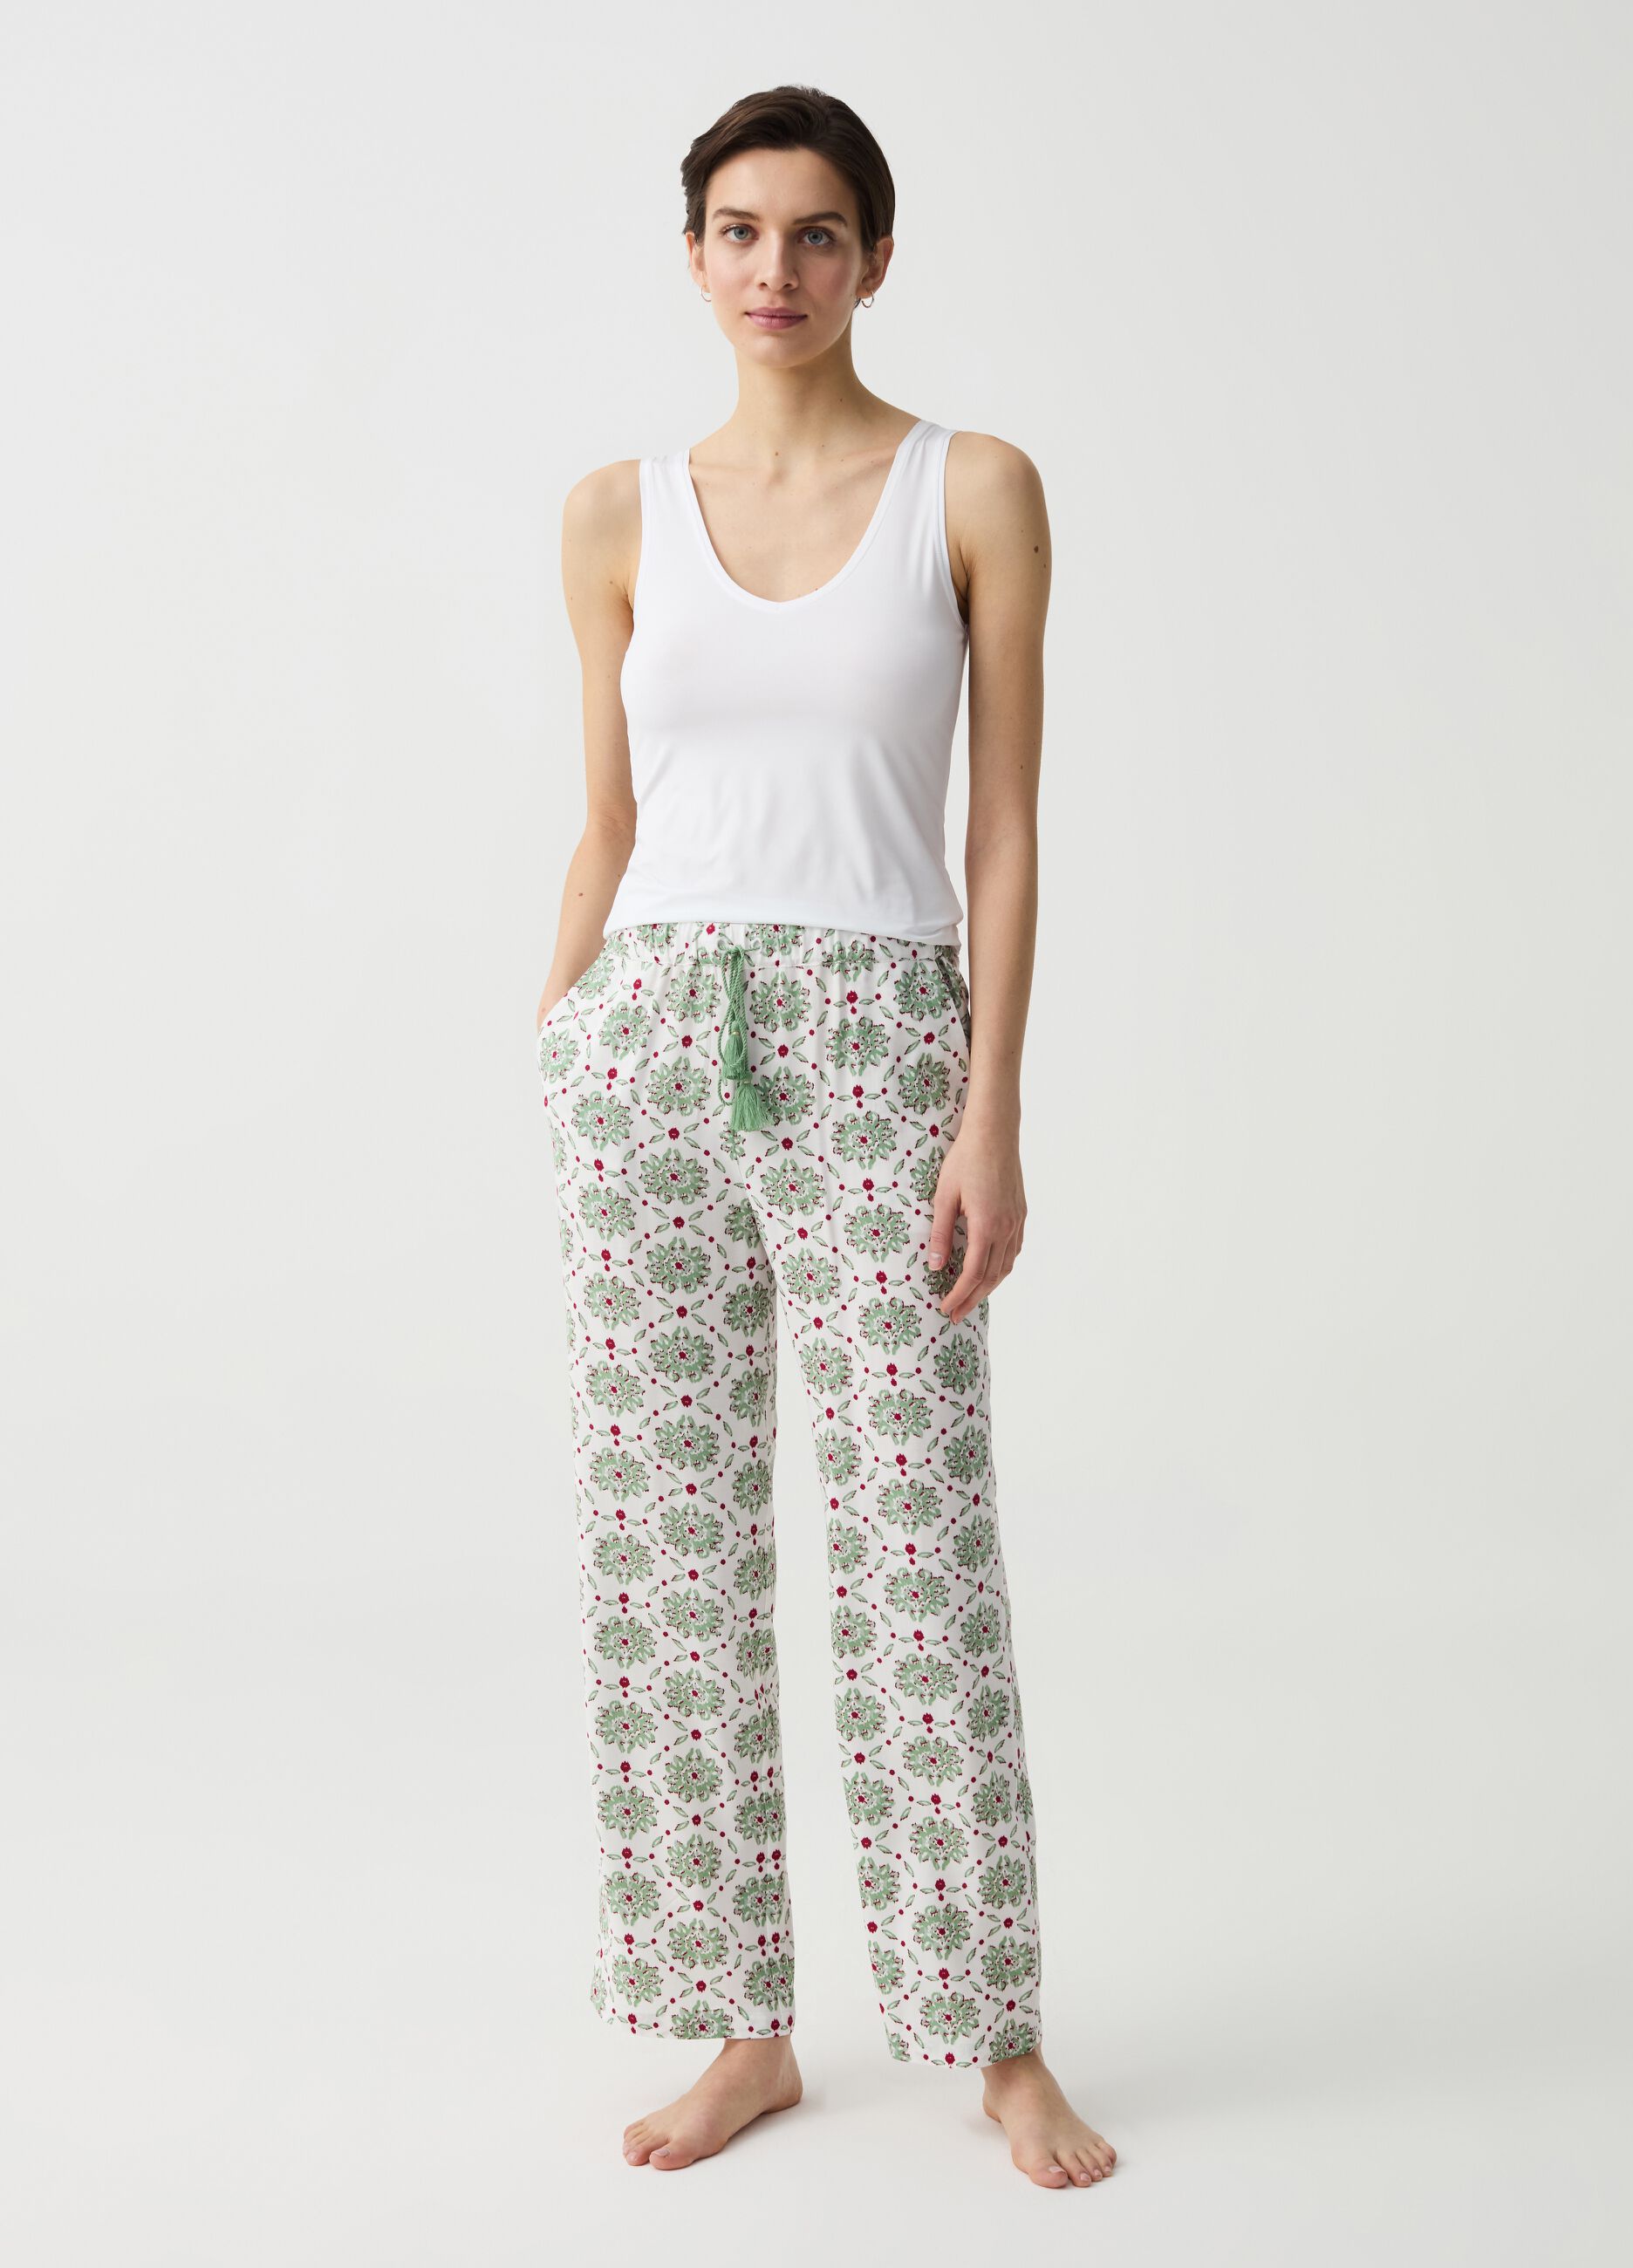 Pyjama trousers with drawstring and tassels